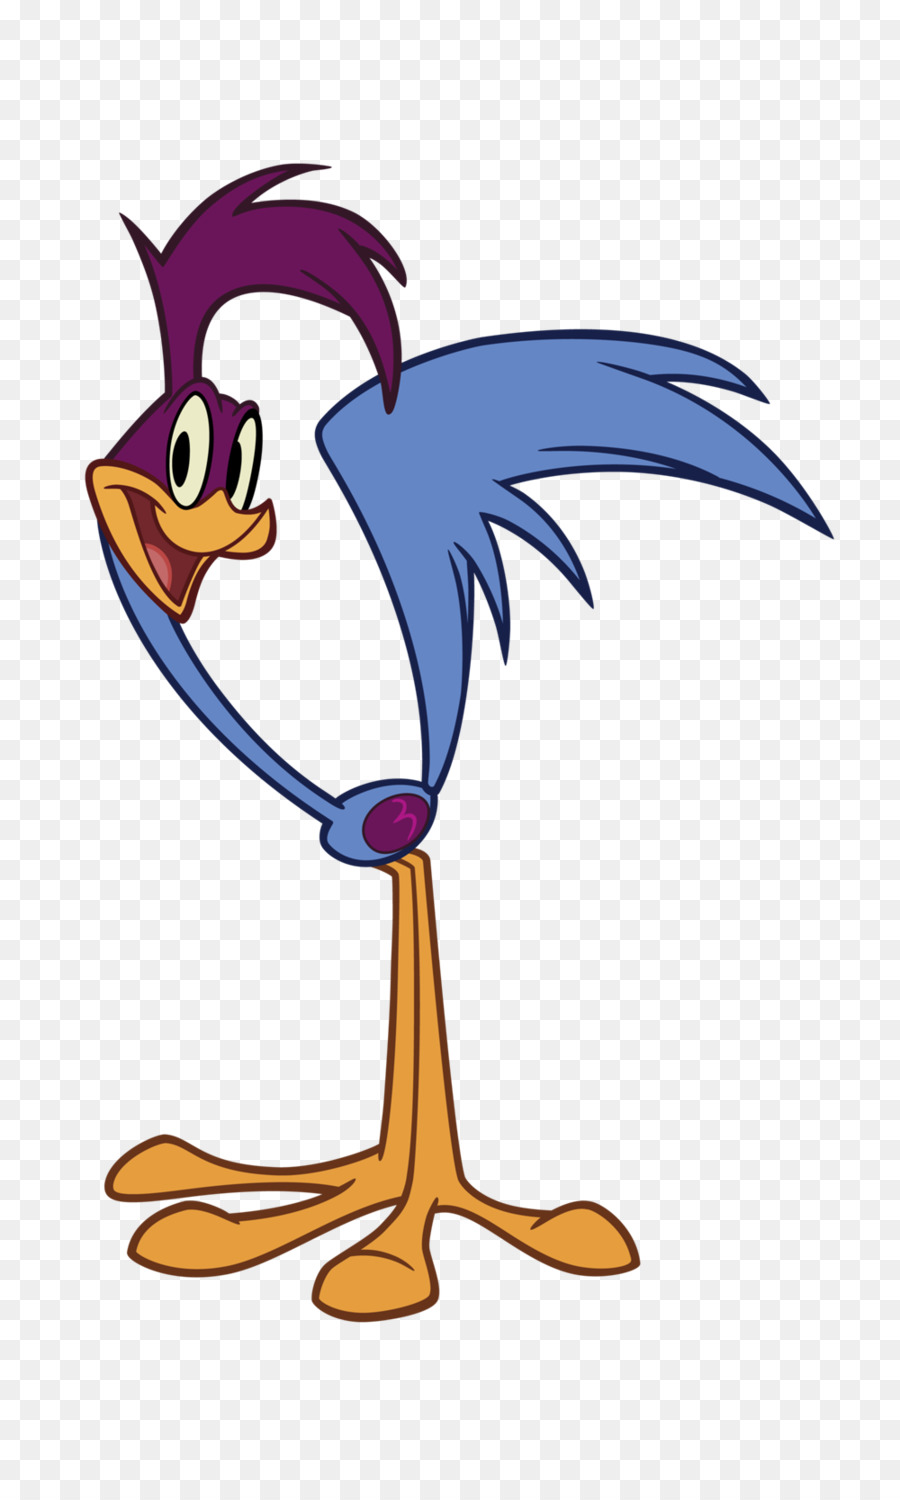 Wile E. Coyote and the Road Runner Looney Tunes Cartoon Clip art - Road Runner Cliparts png download - 1000*1647 - Free Transparent Wile E Coyote And The Road Runner png Download.